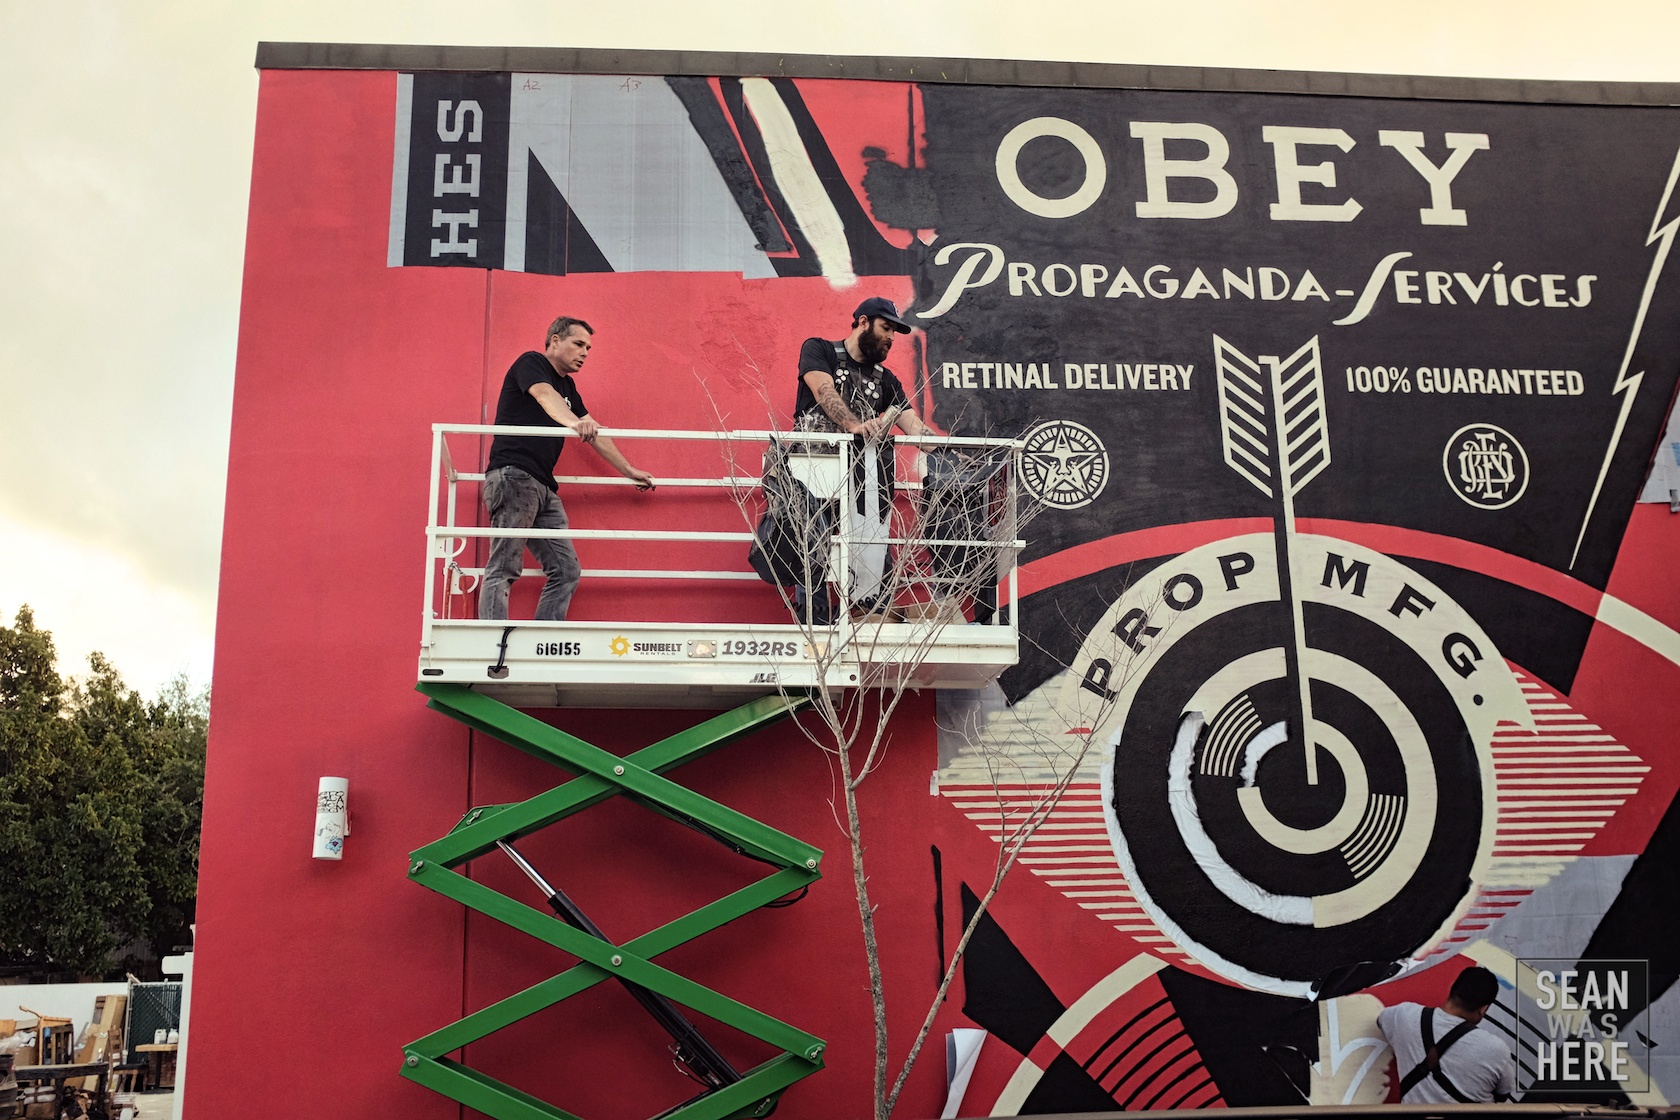 Shepard Fairey (OBEY) with his mural in progress. Wynwood Miami